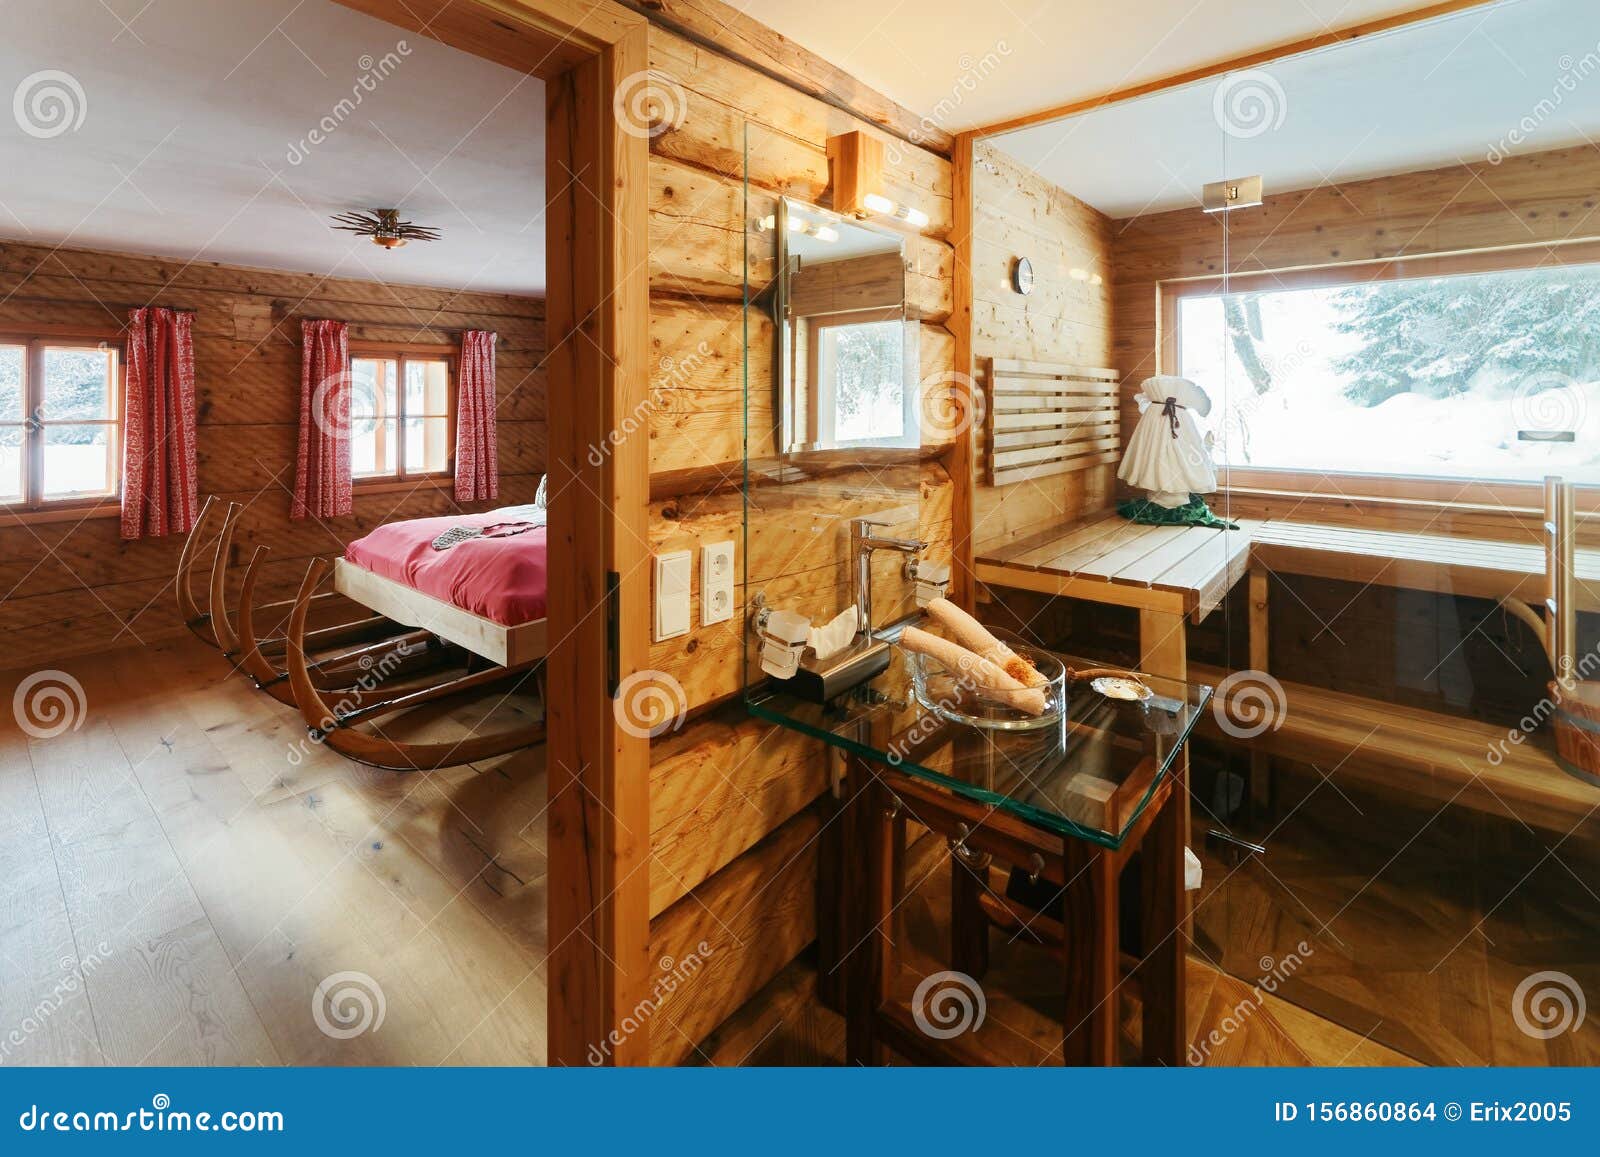 Interior Of Bedroom Modern Design Of Sauna And Bed Stock Photo Image Of Decor Minimal 156860864